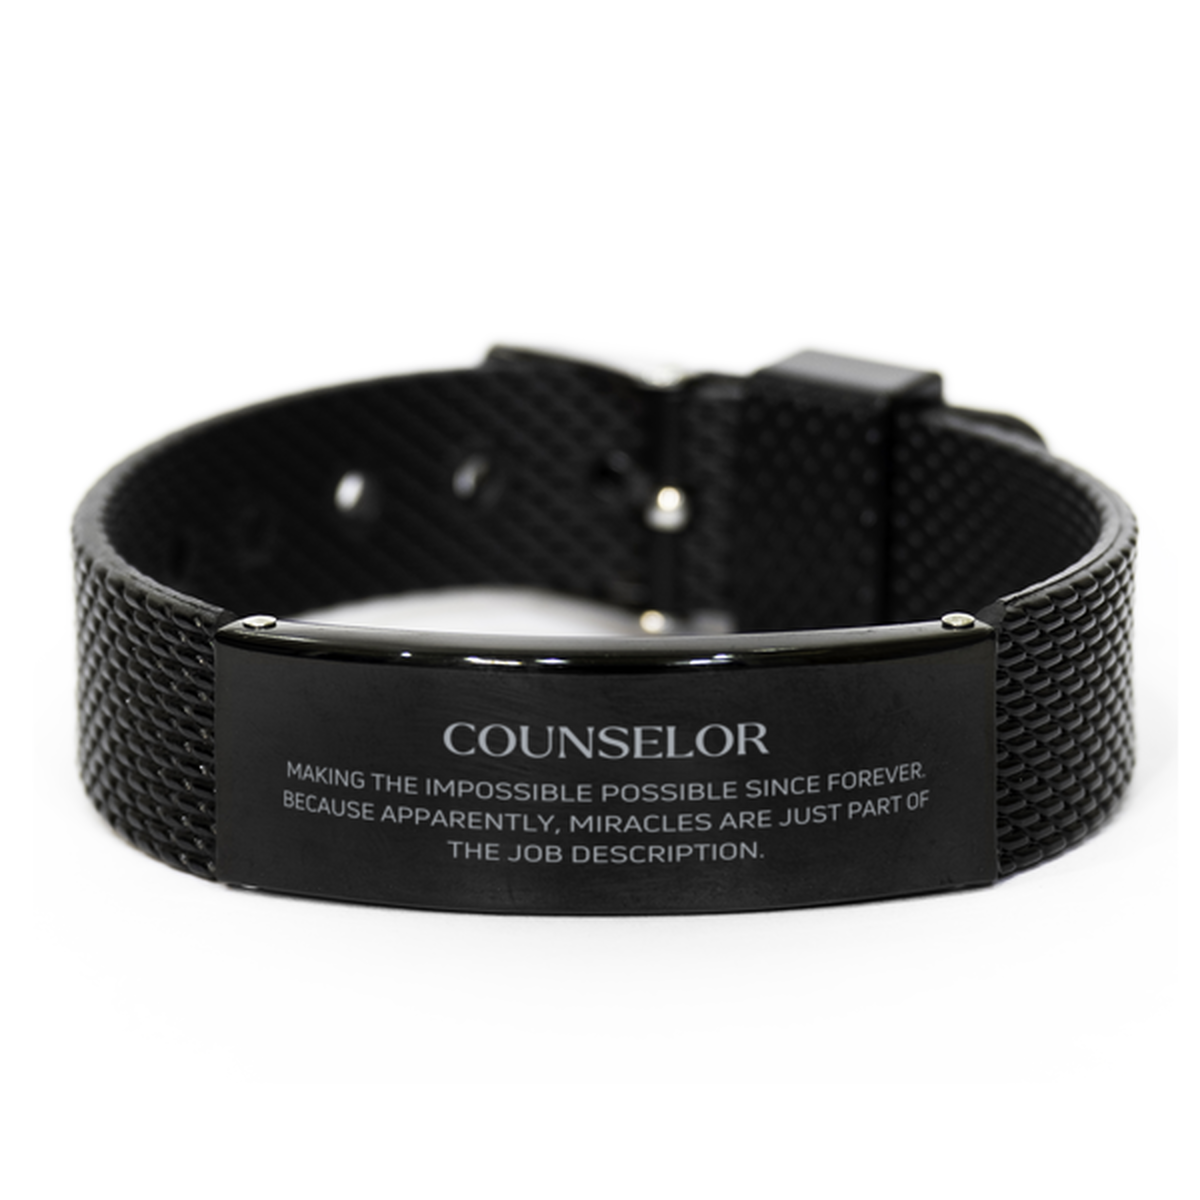 Funny Counselor Gifts, Miracles are just part of the job description, Inspirational Birthday Black Shark Mesh Bracelet For Counselor, Men, Women, Coworkers, Friends, Boss